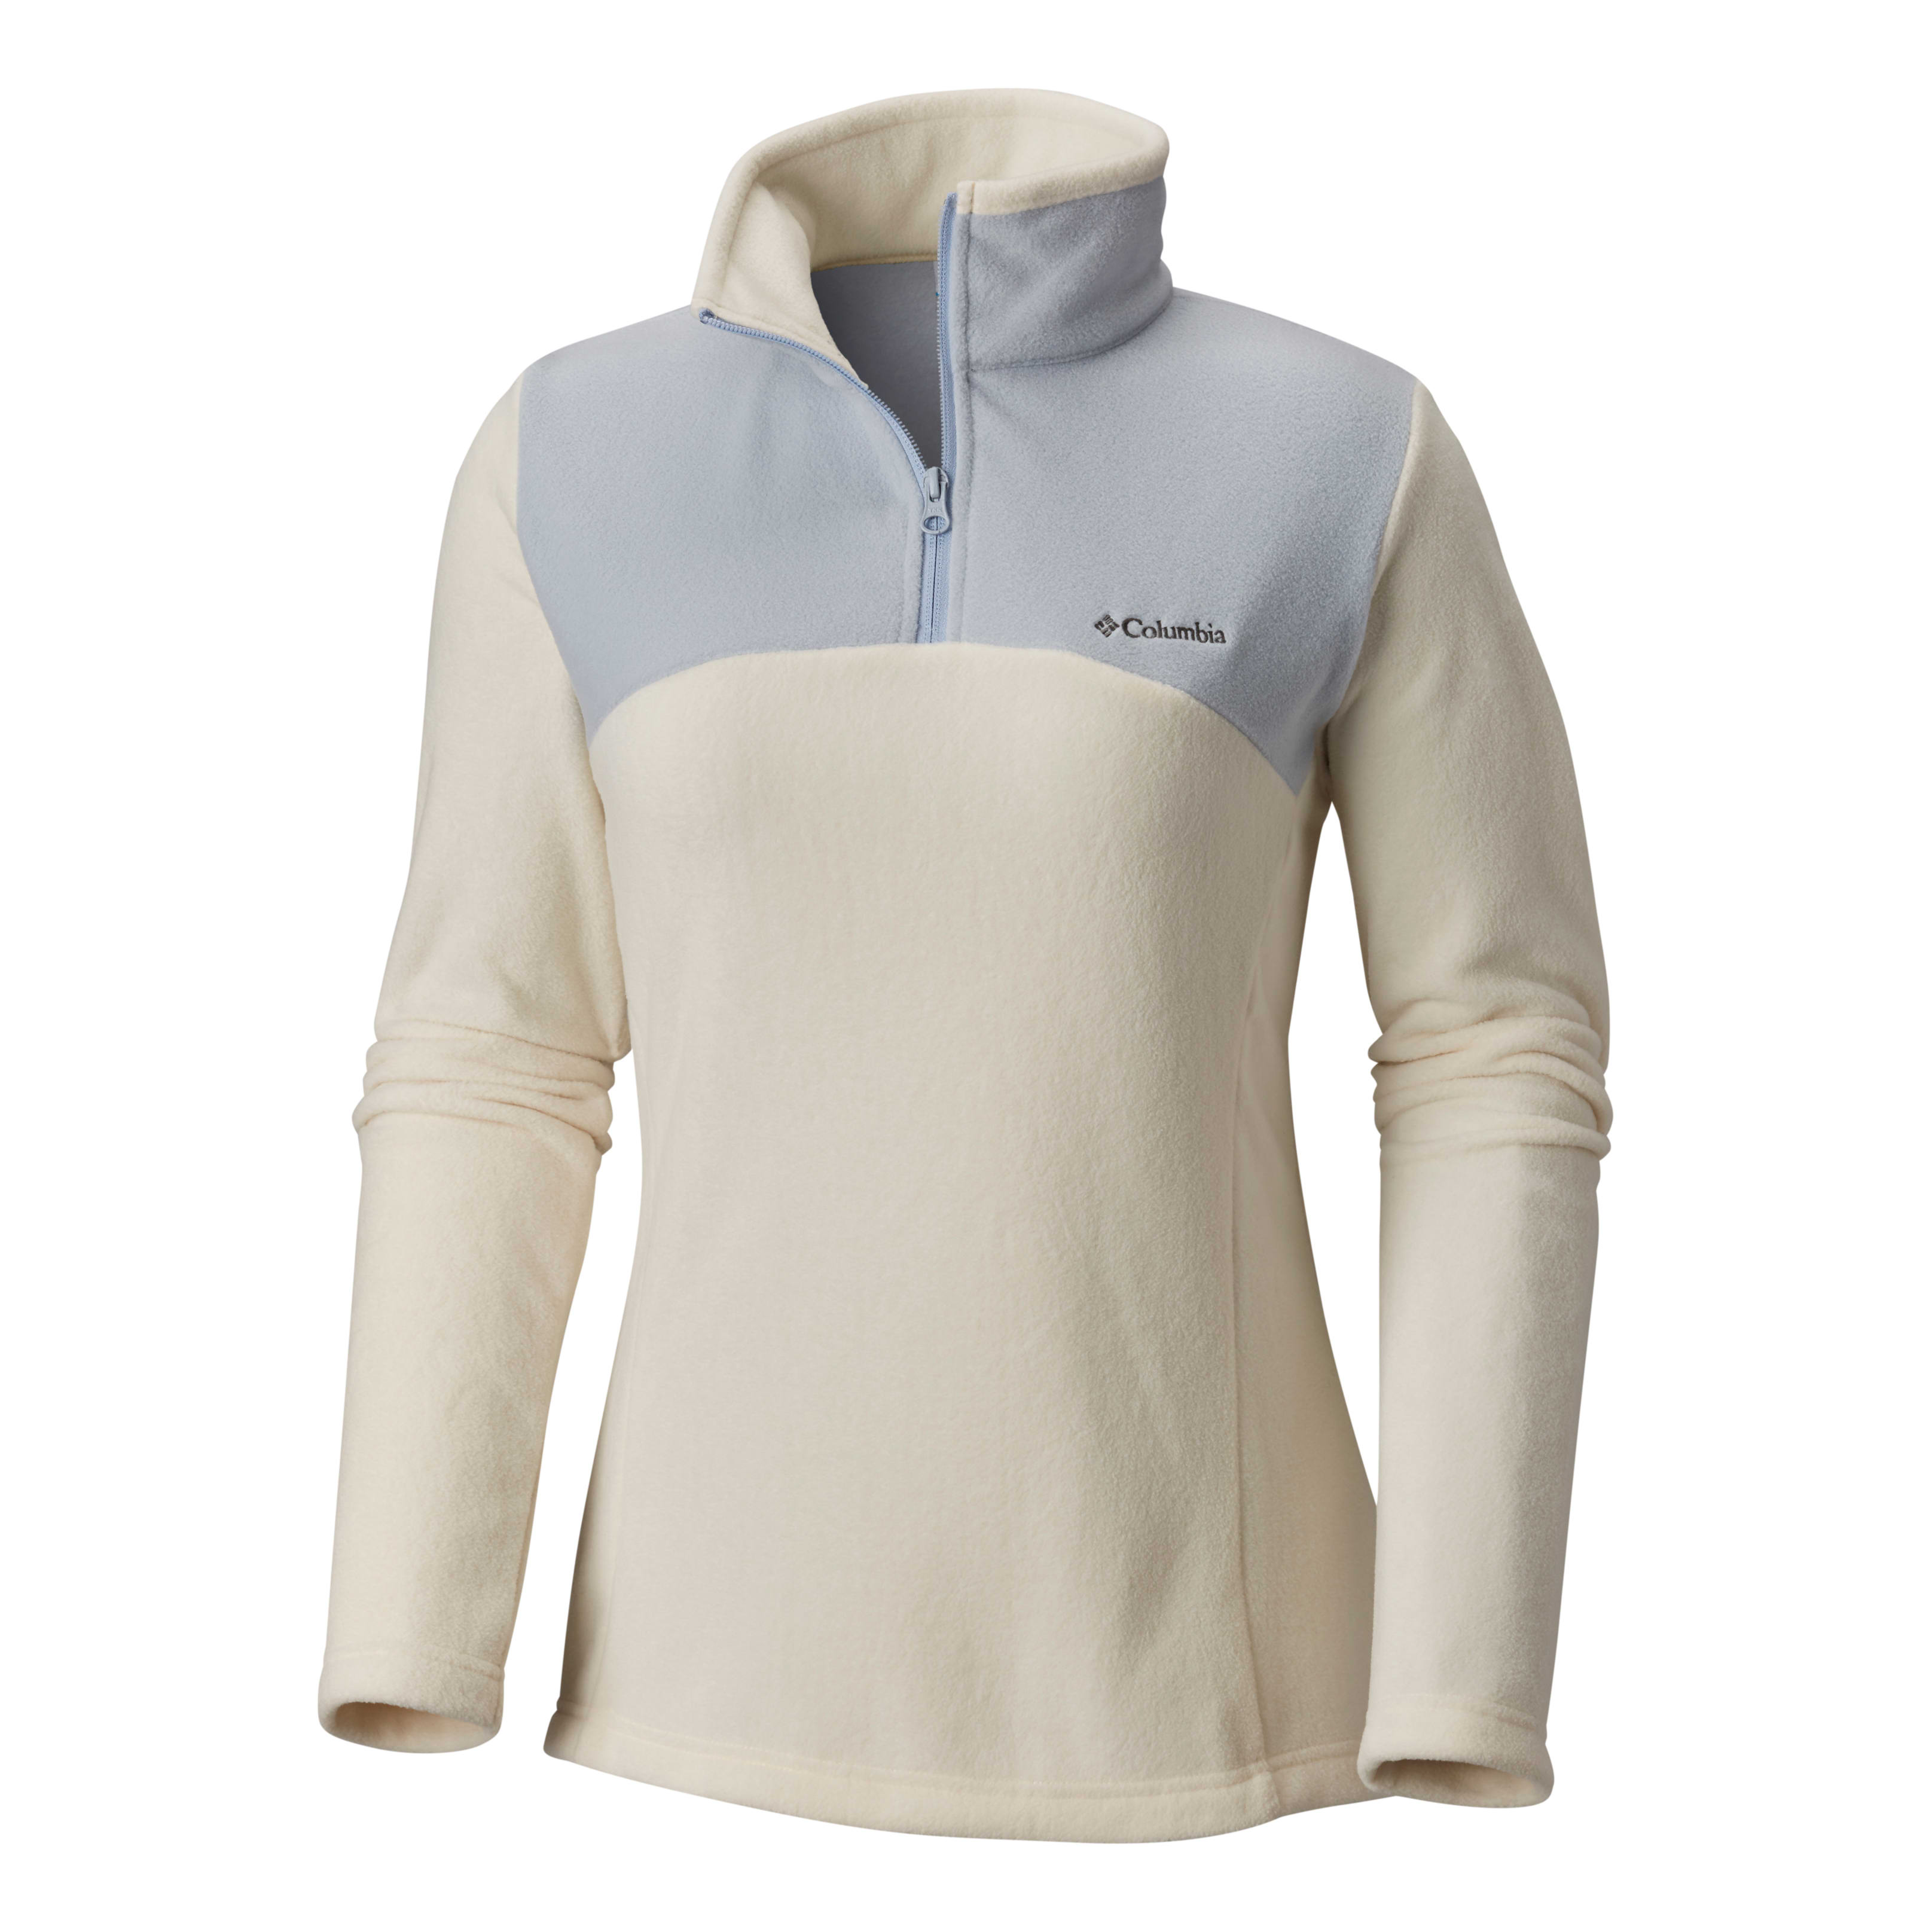 Picture for category Women's Fleece Outerwear